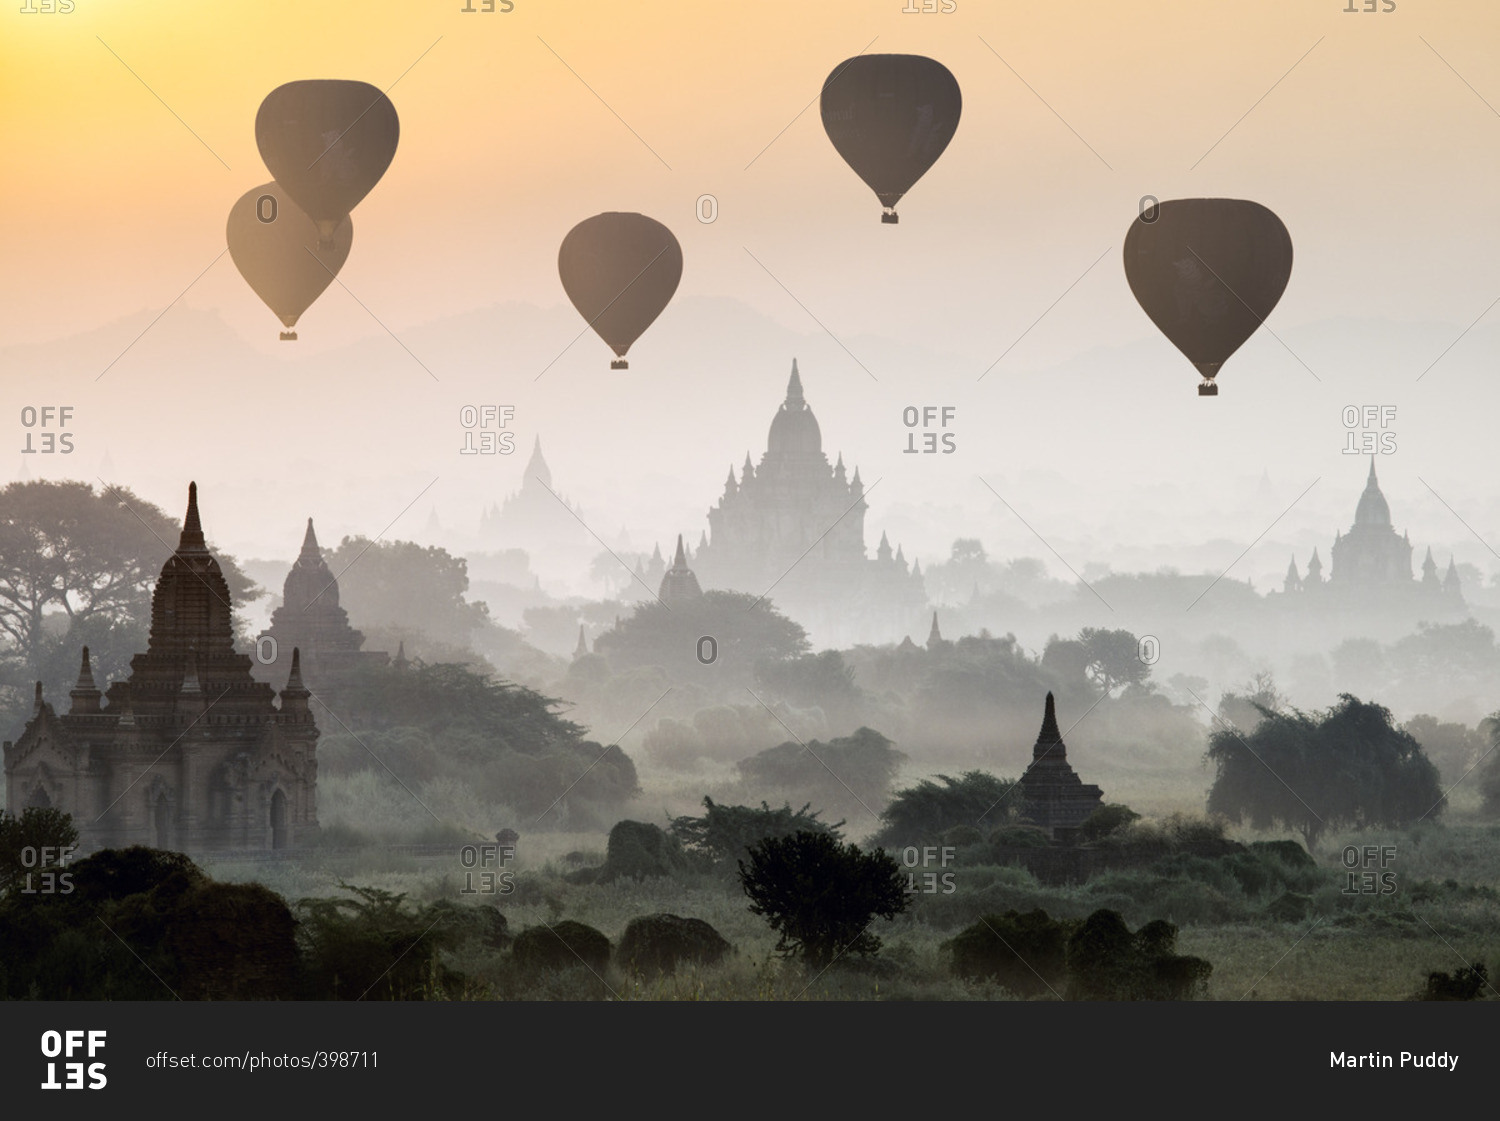 Hot air balloons flying over the ancient temples of Bagan, Myanmar